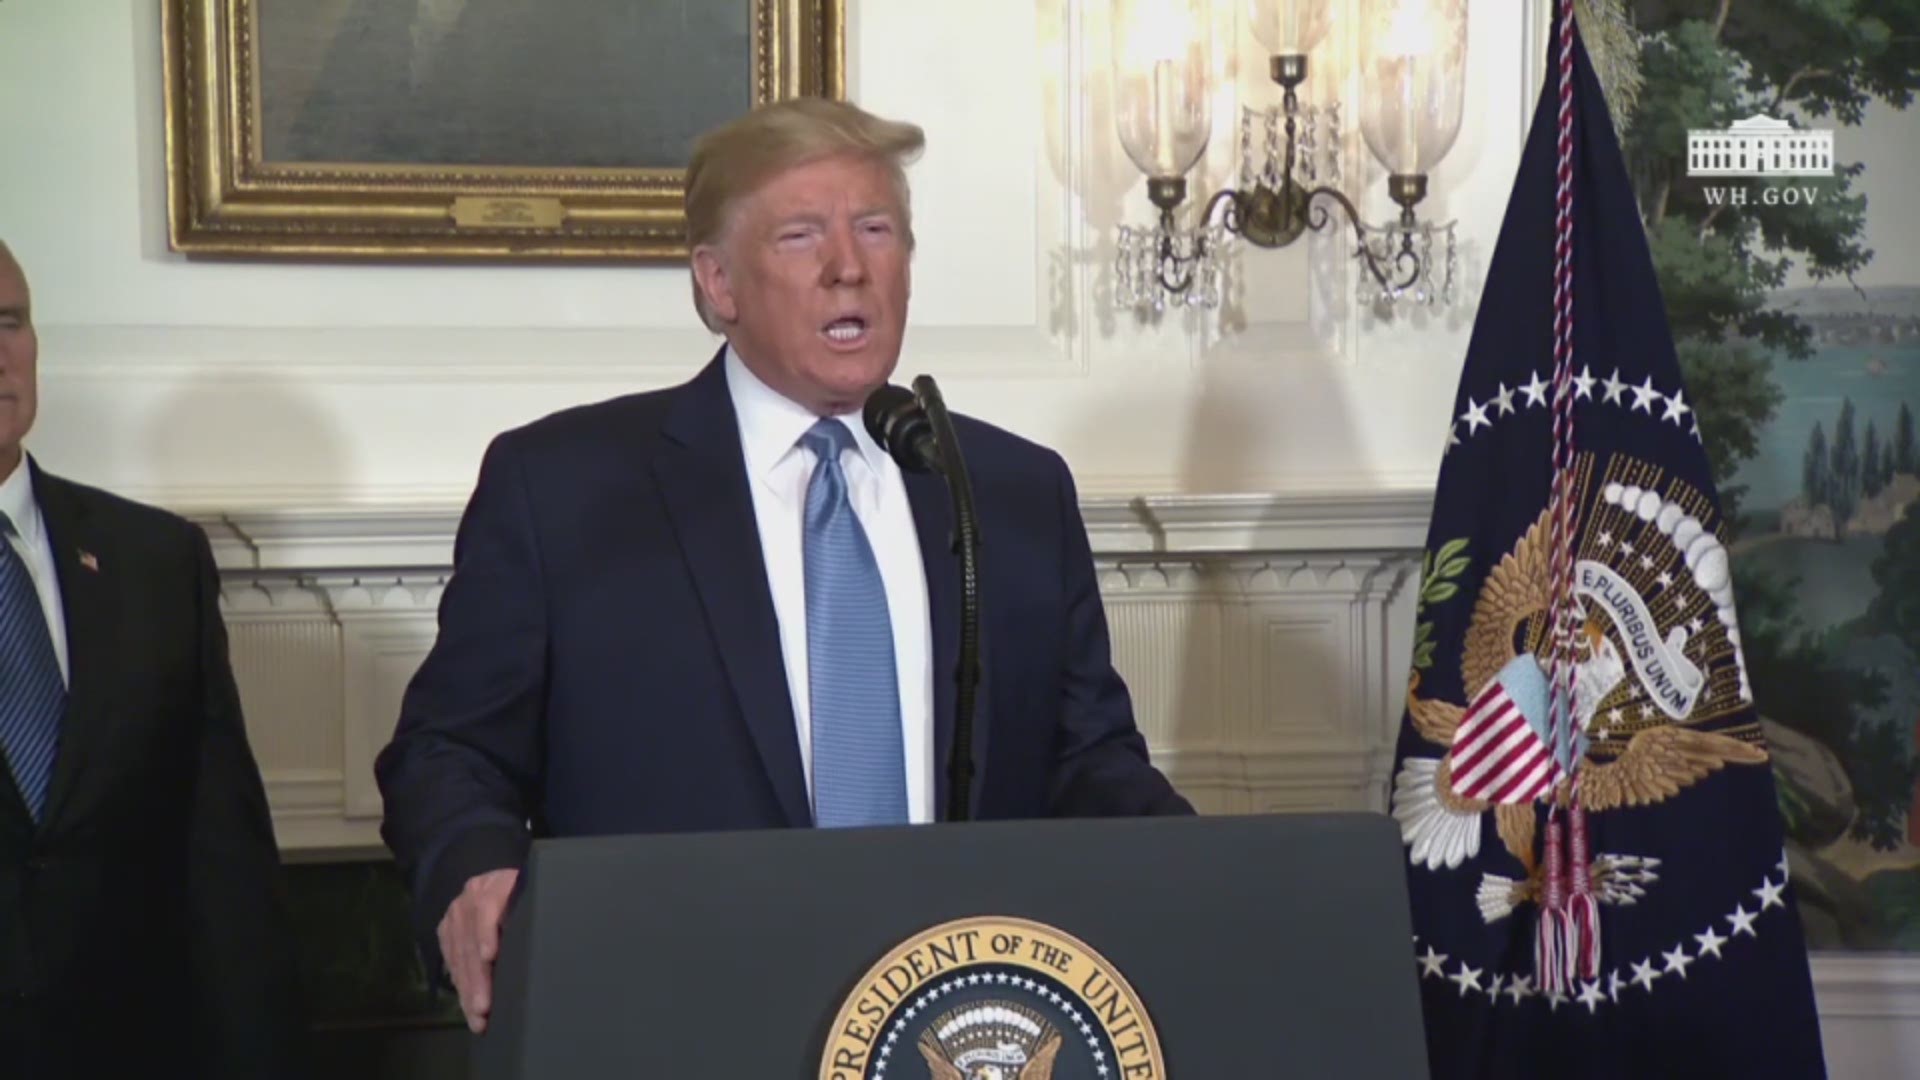 'In one voice, our nation must condemn racism, bigotry and white supremacy,' Trump said. 'Mental illness and hatred pulls the trigger, not the gun.' Trump spoke from the White House on Monday following mass shootings in El Paso and Dayton over the weekend.